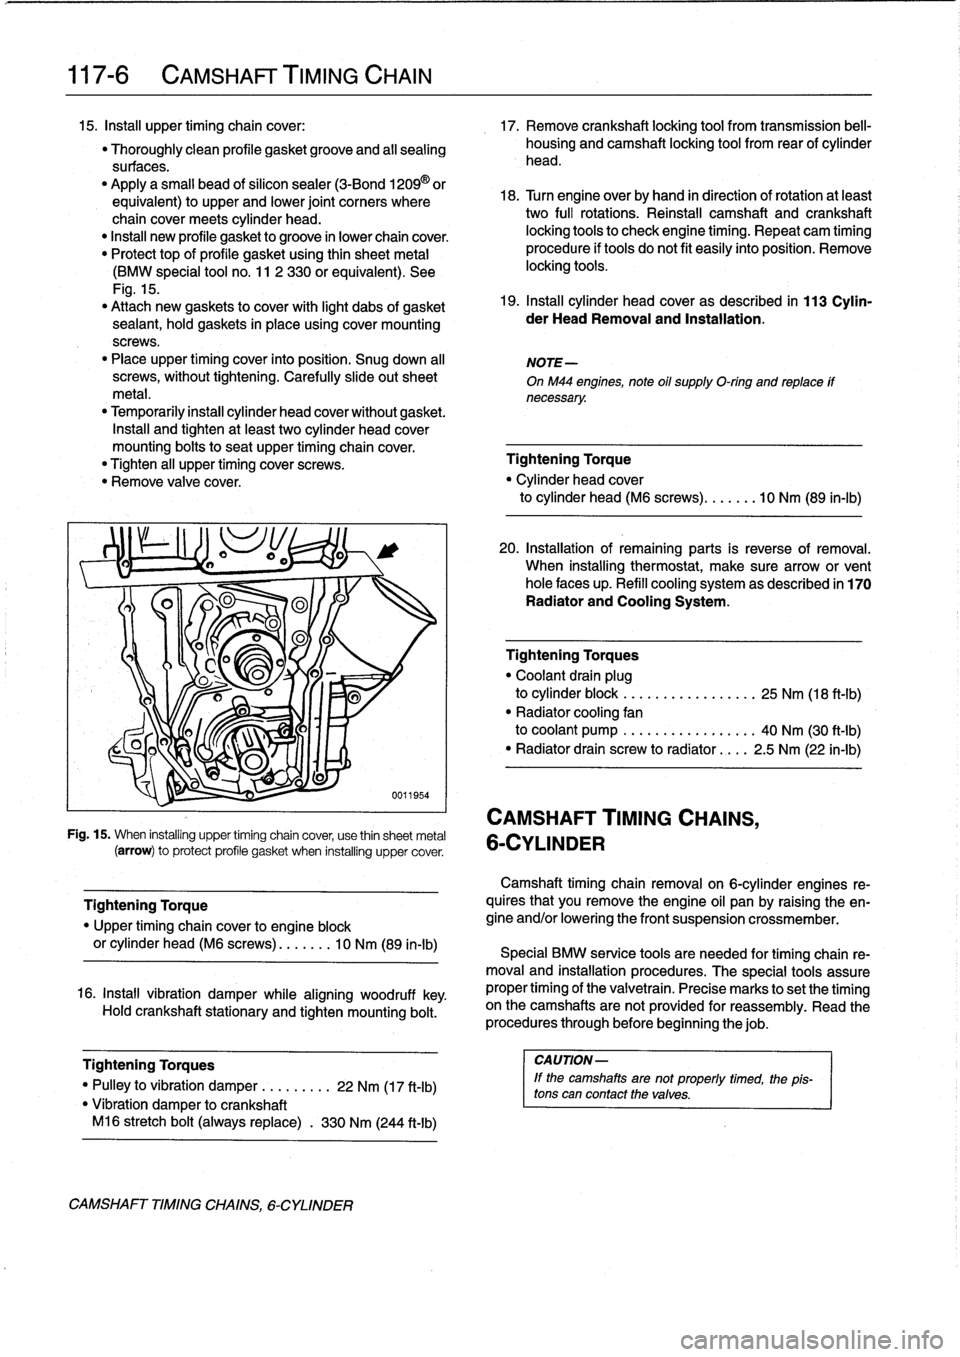 BMW 323i 1993 E36 Owners Manual 
117-
6

	

CAMSHAFT
TIMING
CHAIN

15
.
Insta¡¡
upper
timing
chaincover
:

	

17
.
Remove
crankshaft
locking
tool
from
transmission
bell-

"
Thoroughly
clean
profile
gasketgroove
and
all
sealing

	
